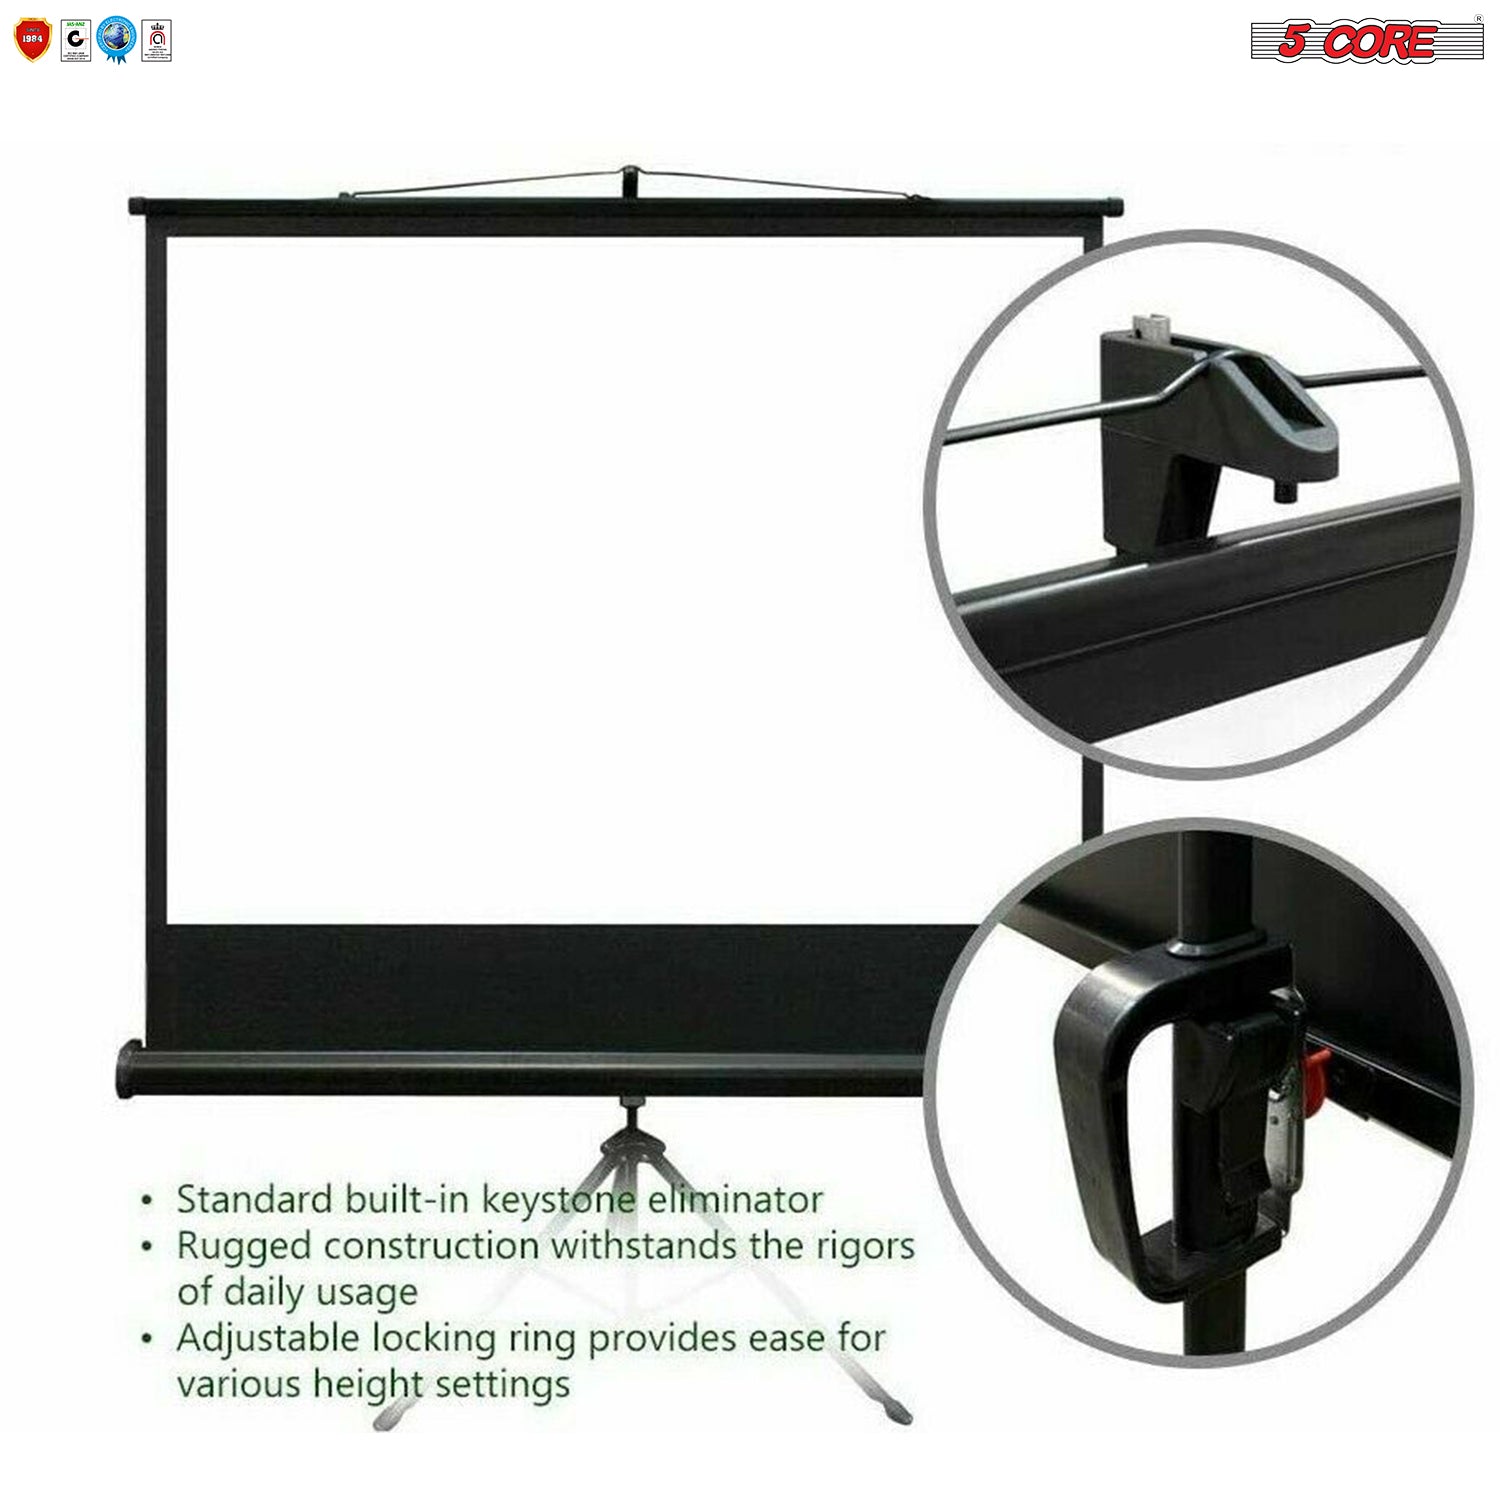 5 Core 72 inch Projection Screen 4:3 Foldable and Portable Anti-Crease Indoor Outdoor Projection Screen for Home, Party, Office -SCREEN TR 72 (4:3)